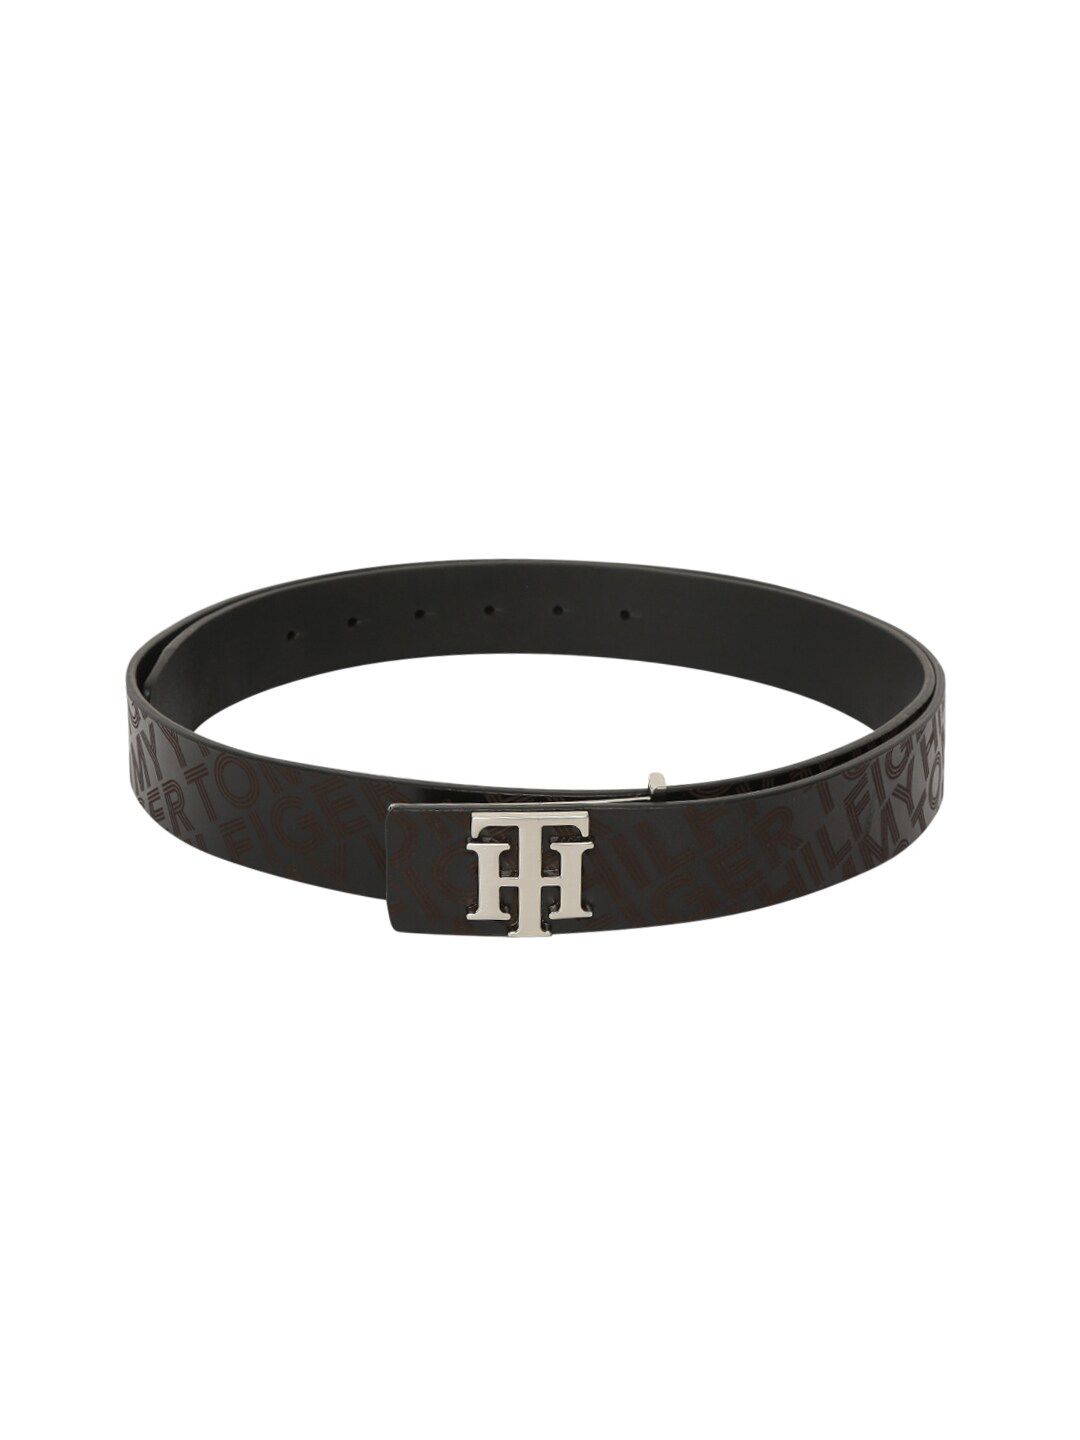 Tommy Hilfiger Unisex Black Printed Leather Belt Price in India